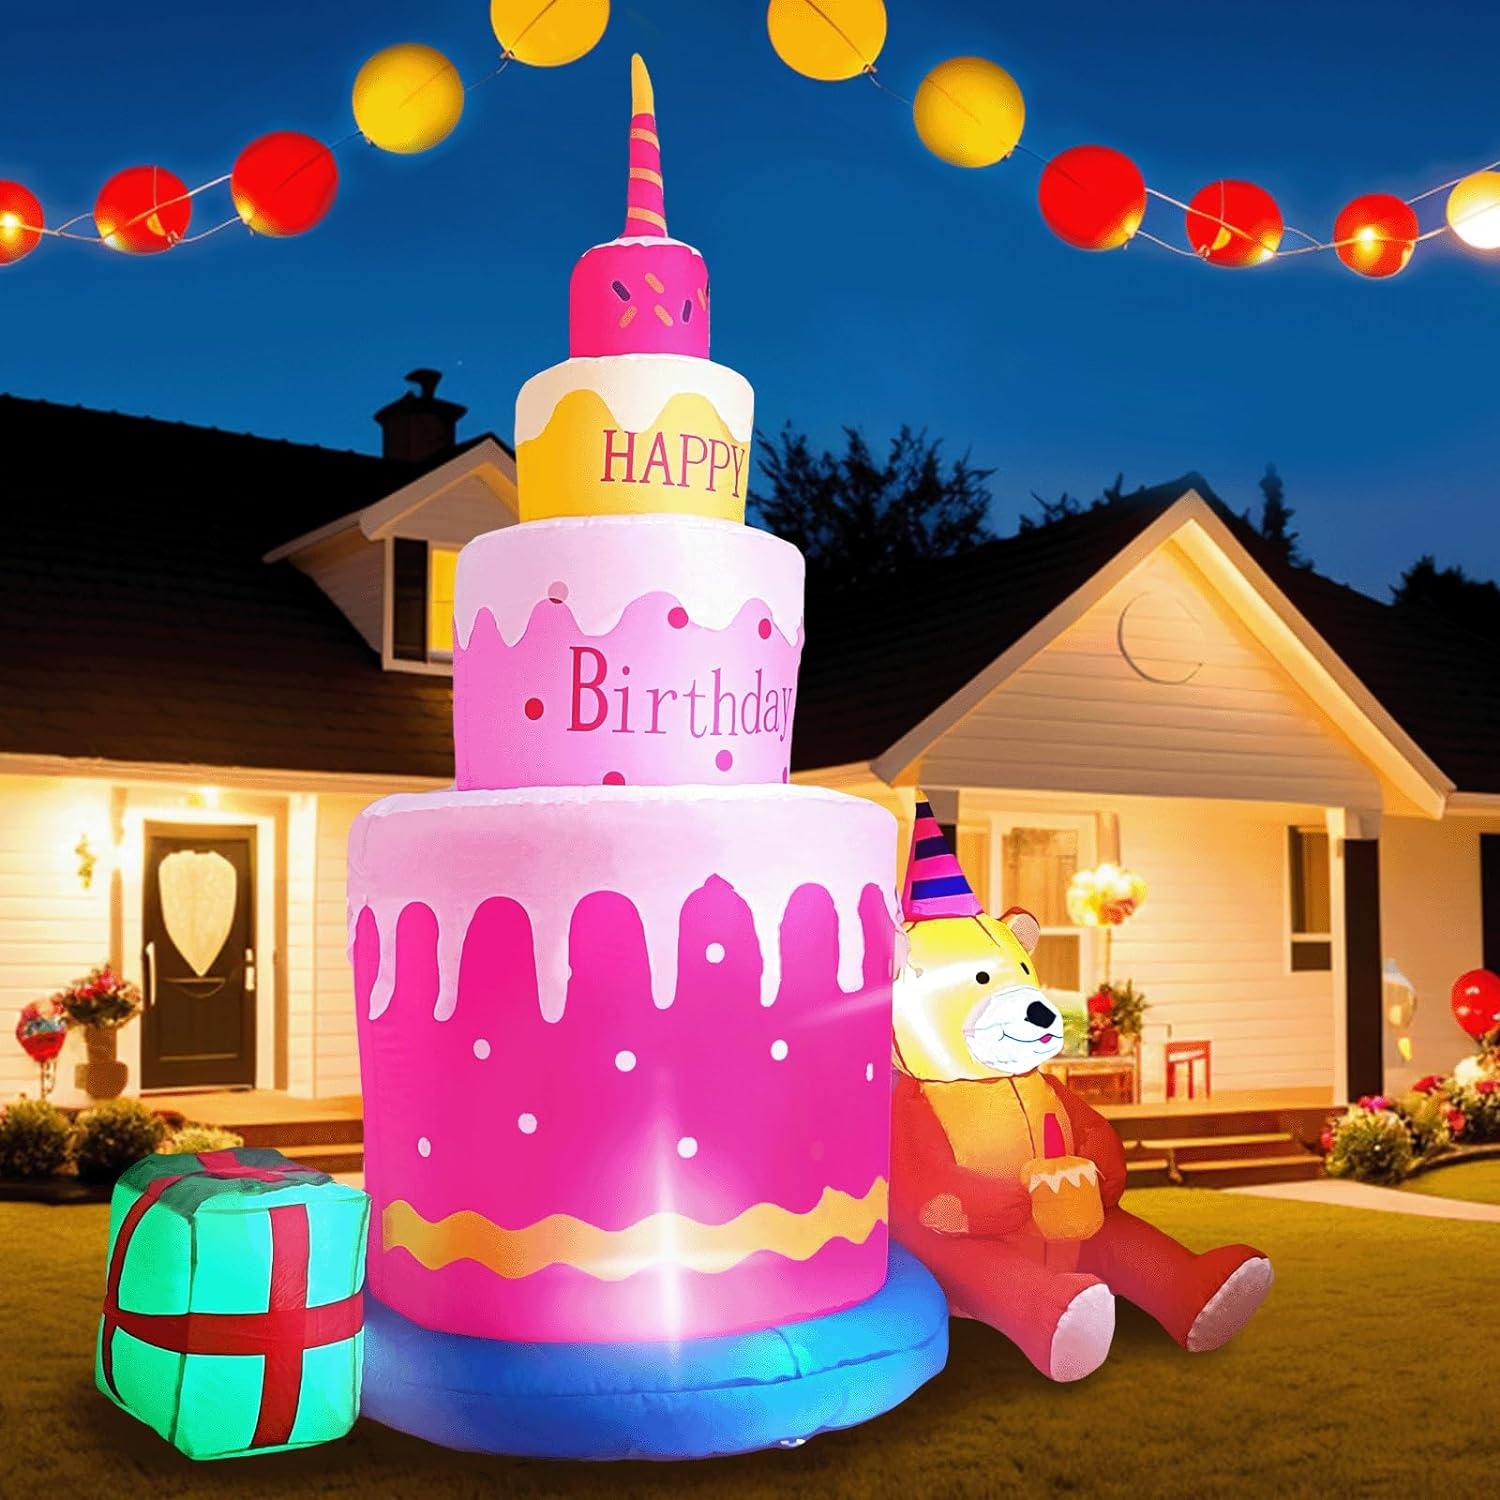 6FT Happy Birthday Inflatable Decorations Lighted Blow up Yard Party Decor Gifts